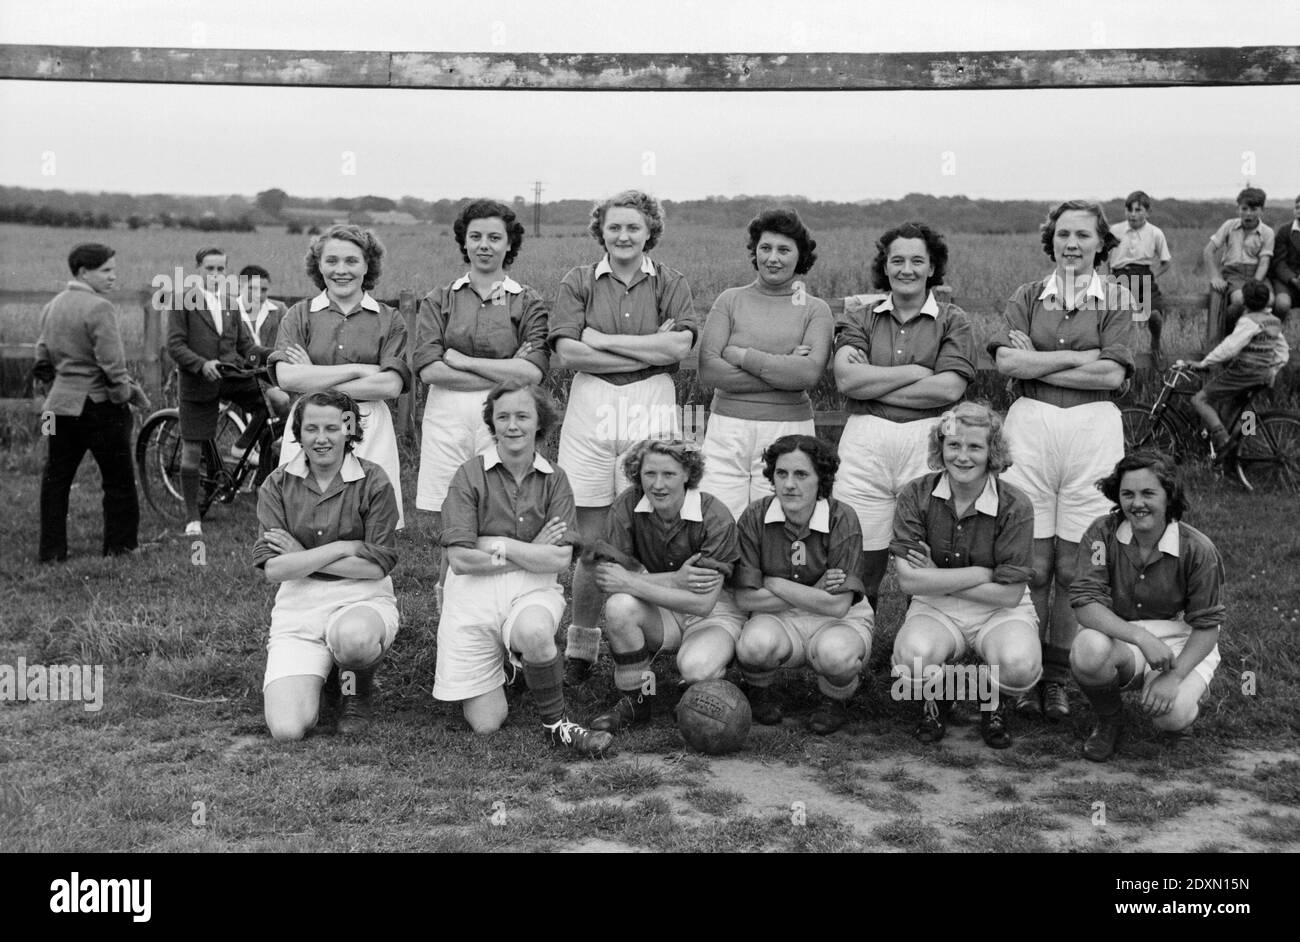 A vintage 1950s black and white photograph of a women football, soccer, team in England. Stock Photo